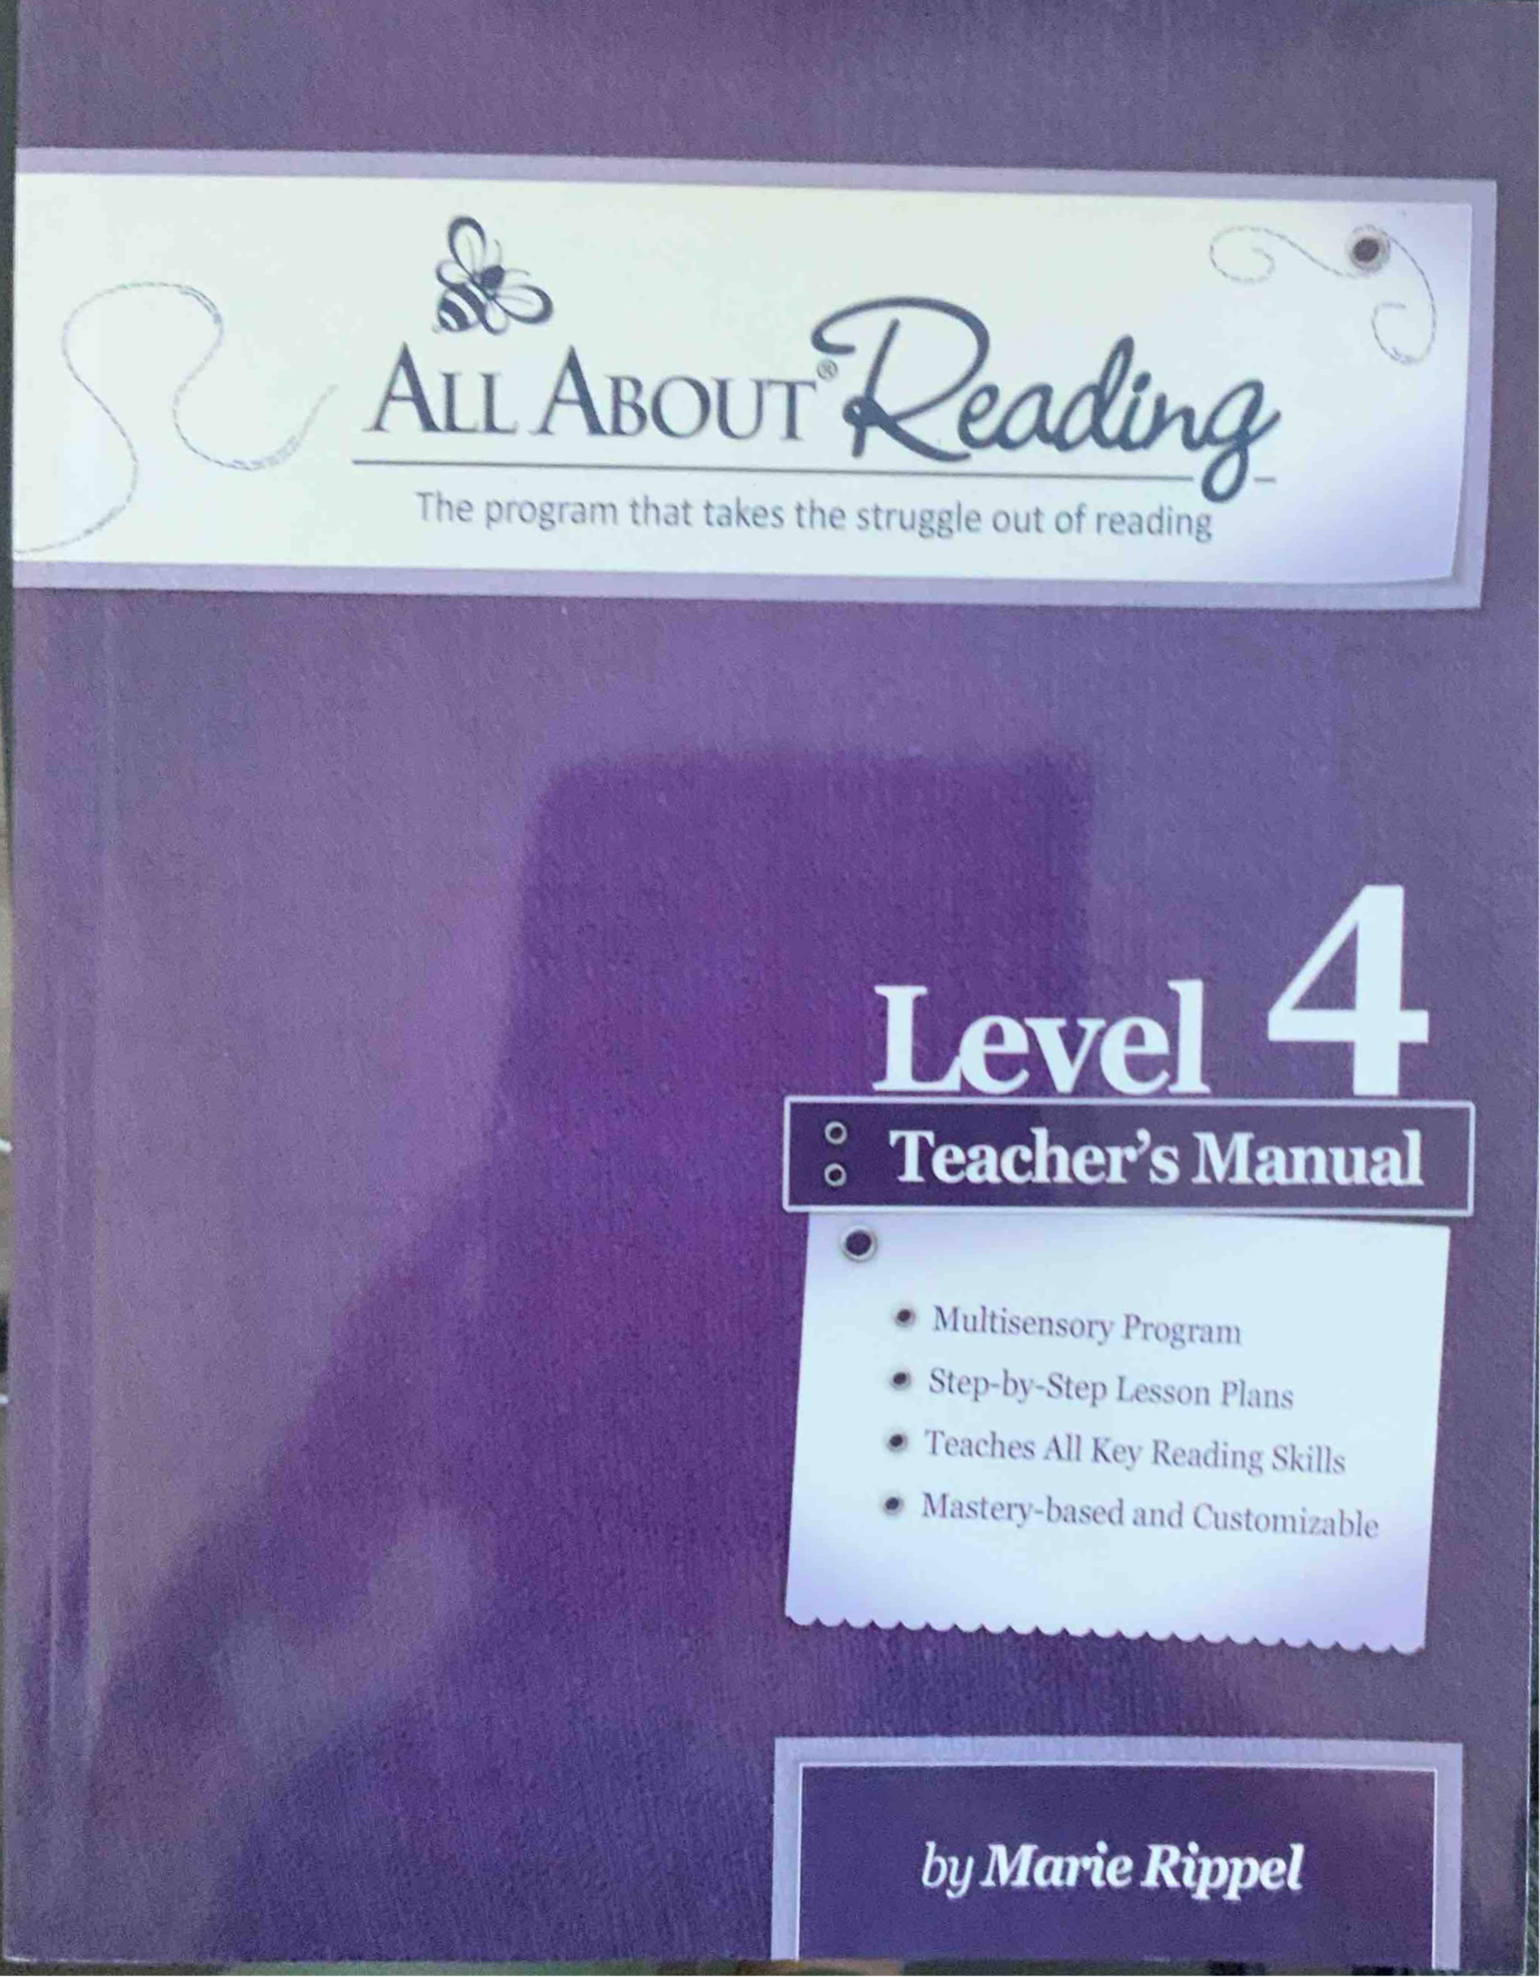 All About Reading Level 4  Teacher's Manual - Color Edition